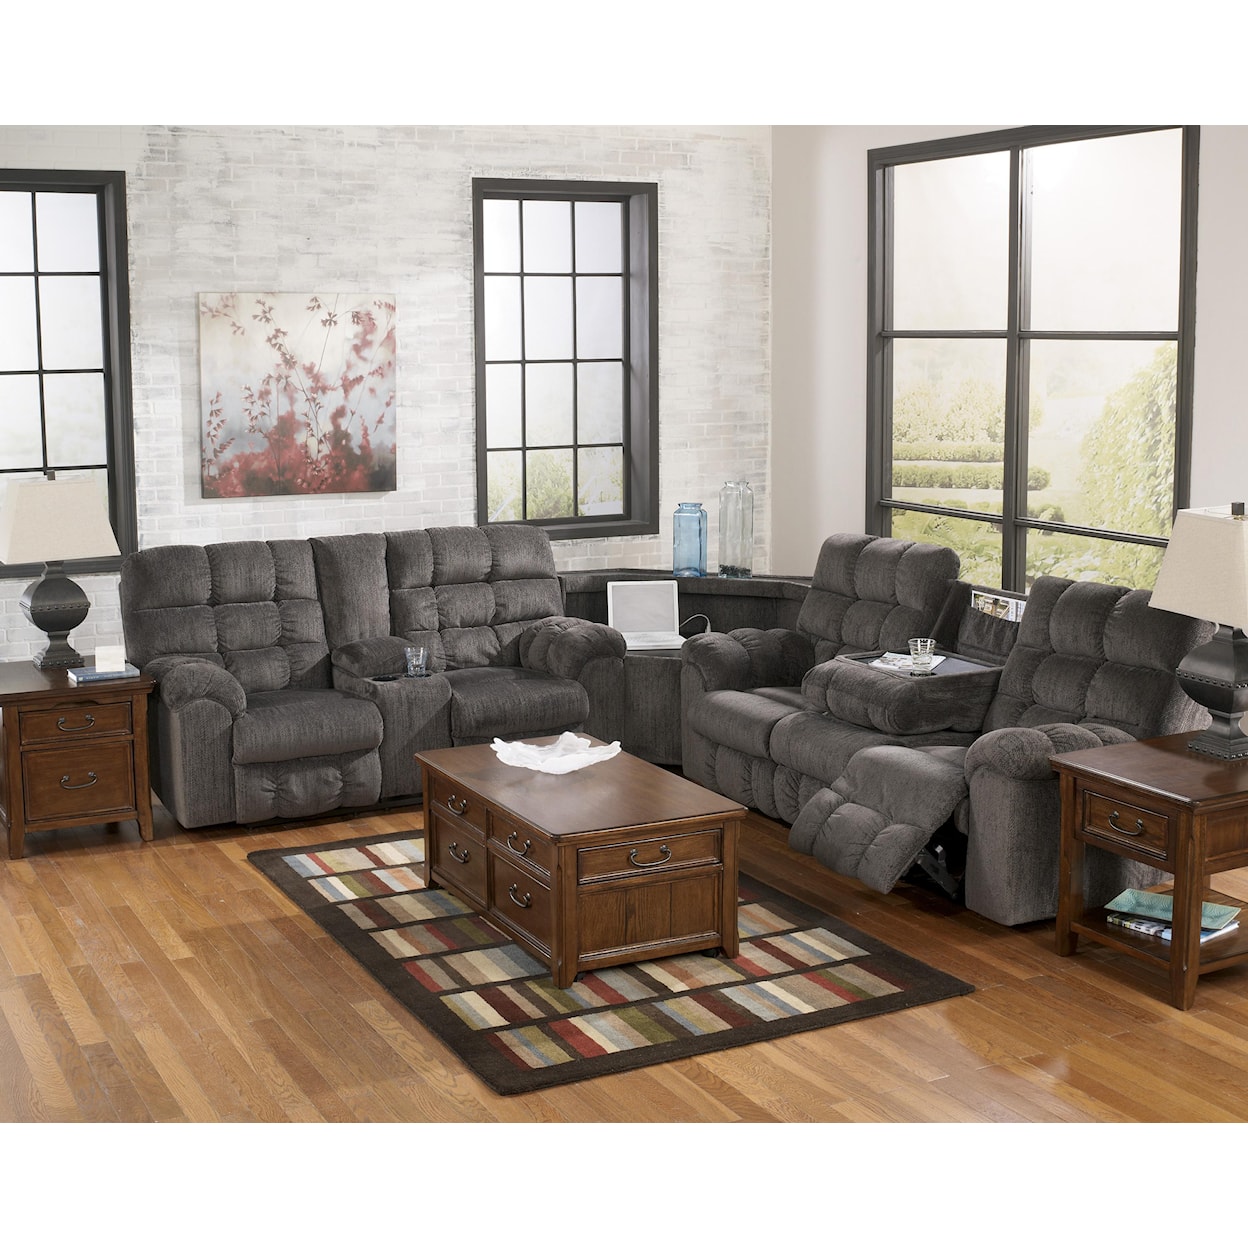 Signature Design by Ashley Acieona Reclining Sectional with Left Side Loveseat